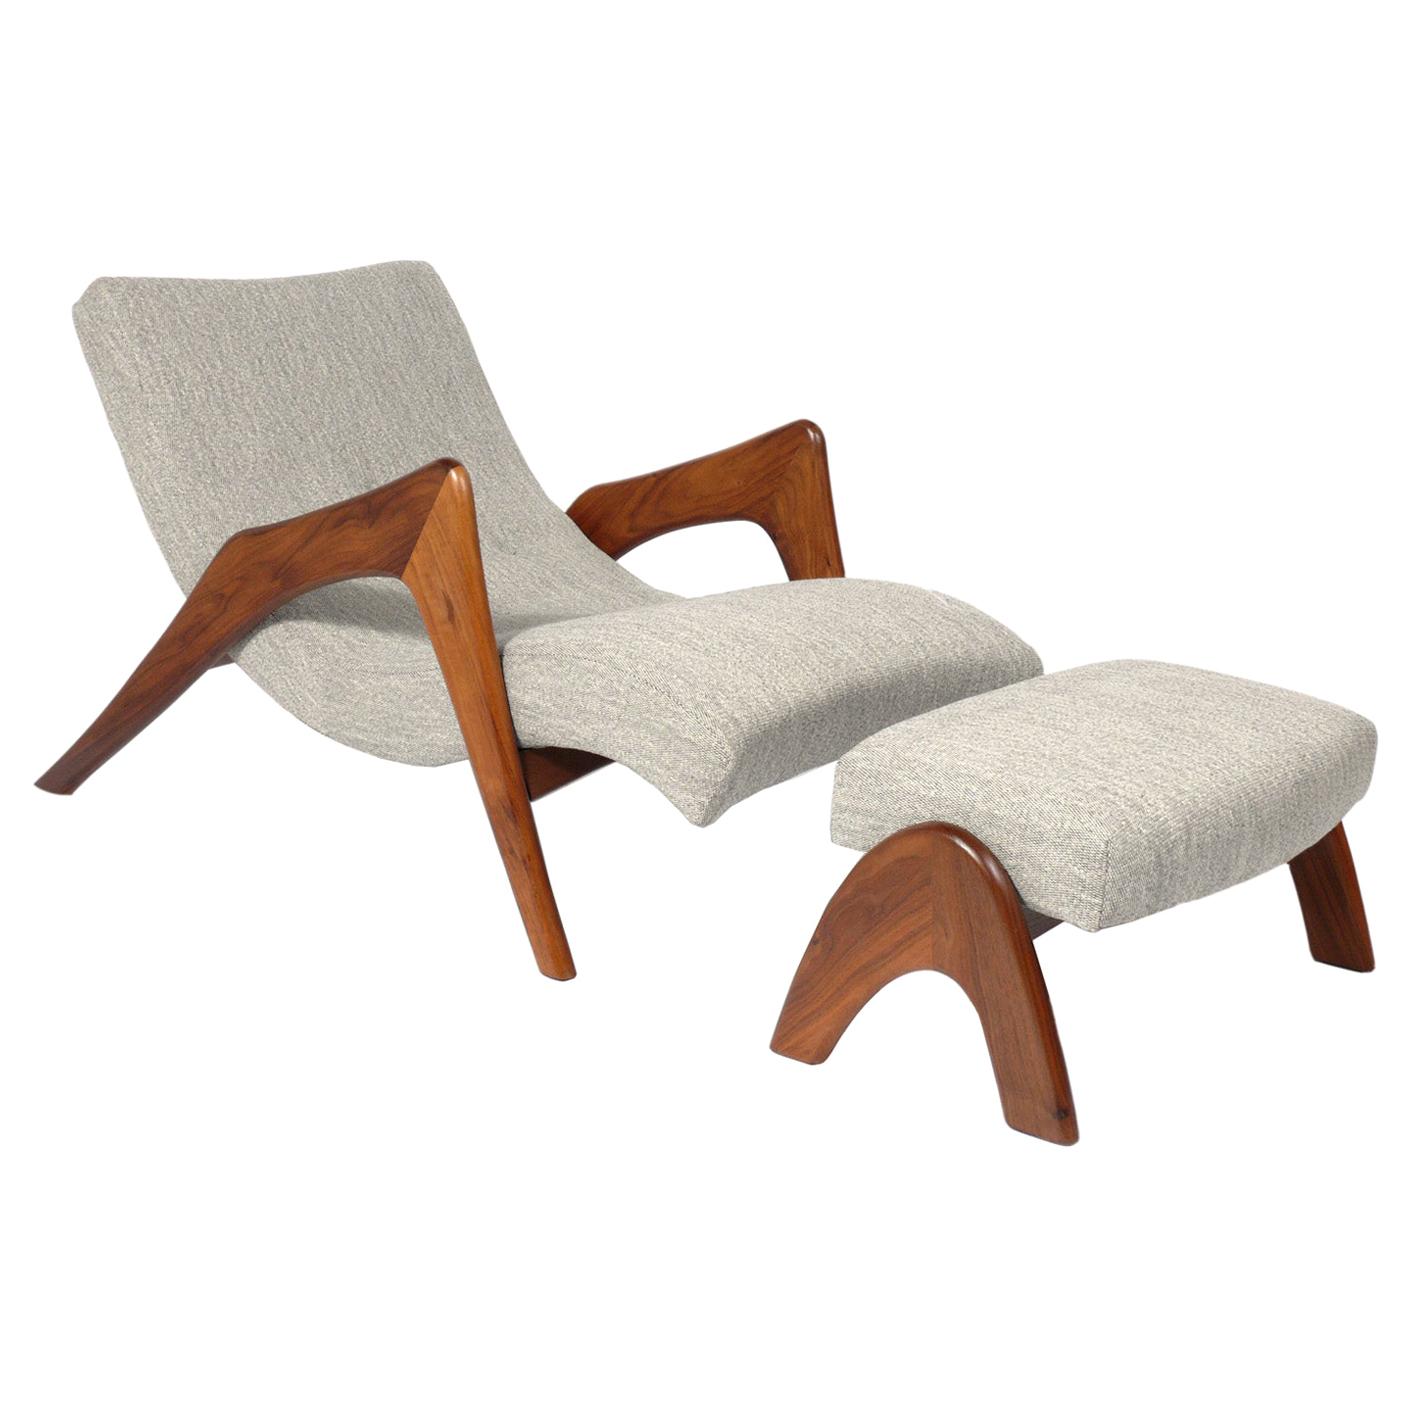 Adrian Pearsall Chaise Lounge Chair and Ottoman